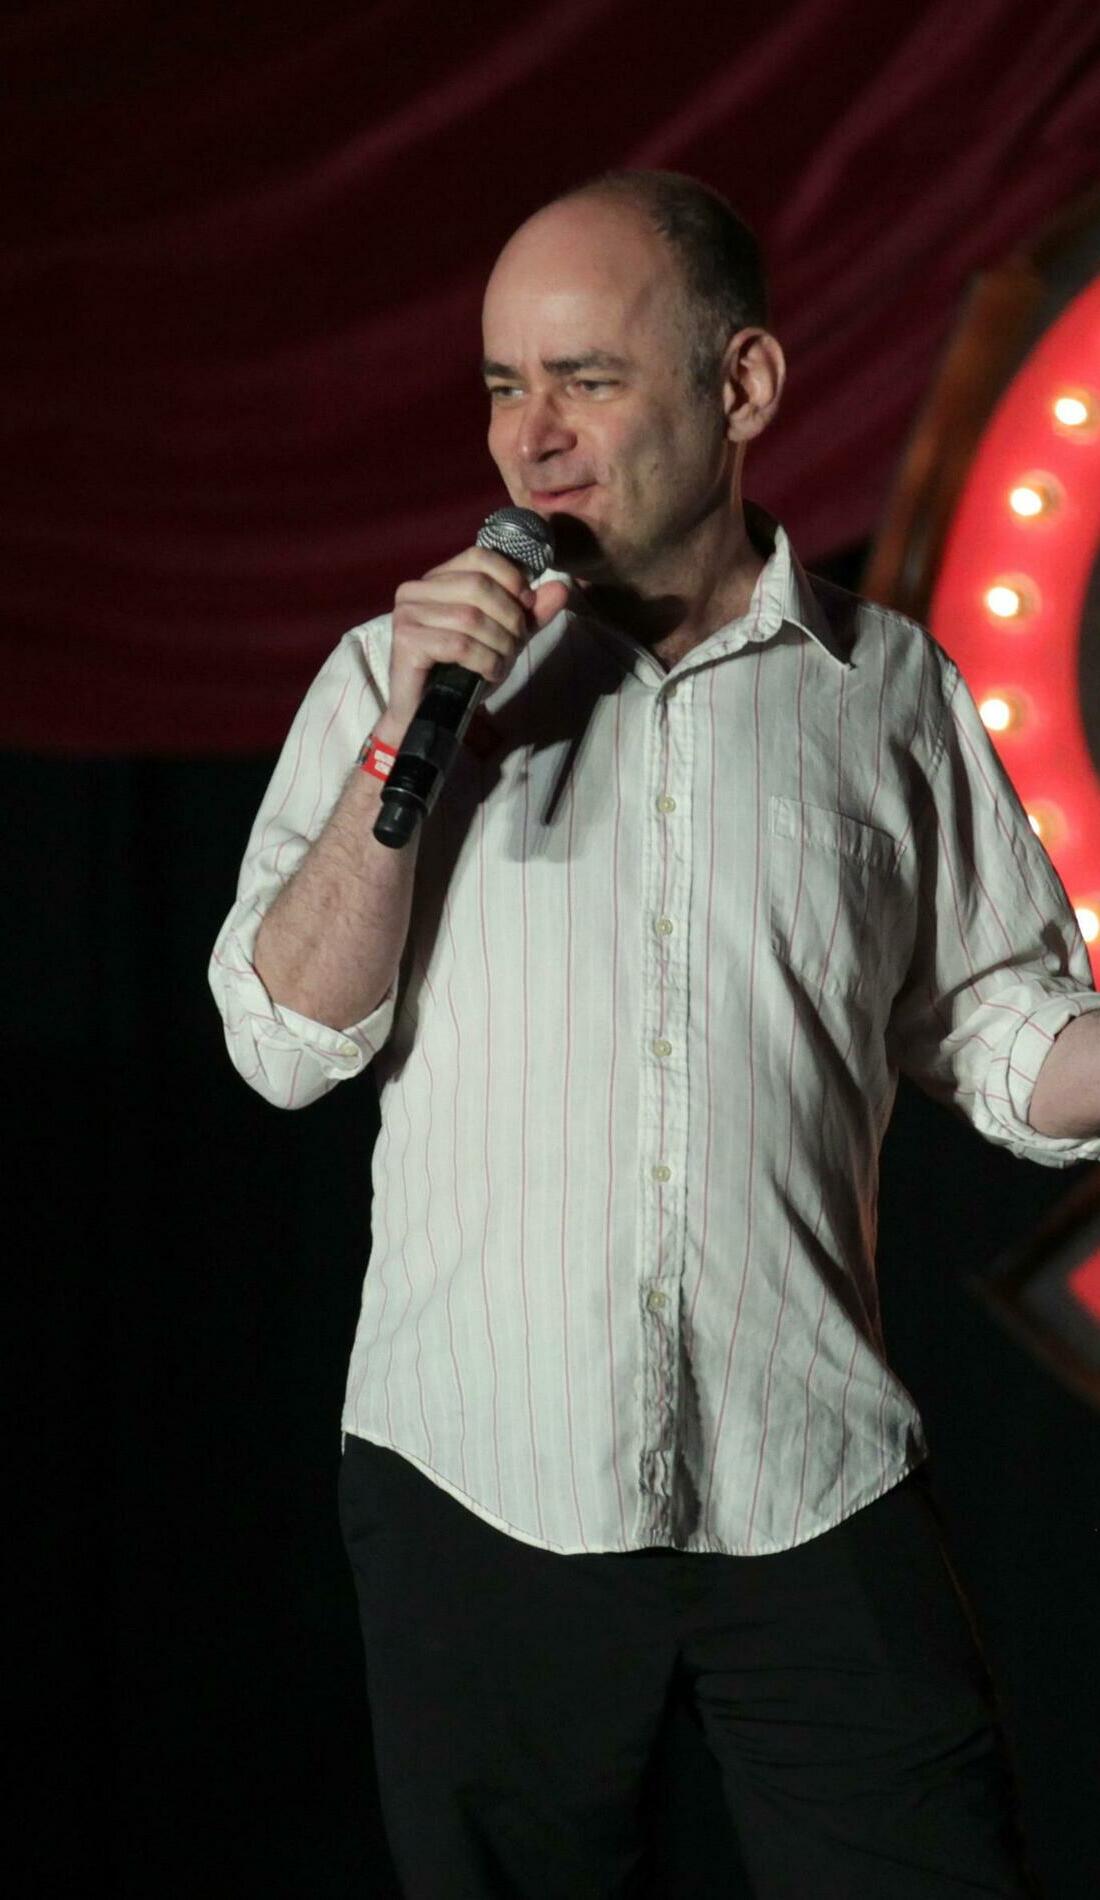 A Todd Barry live event